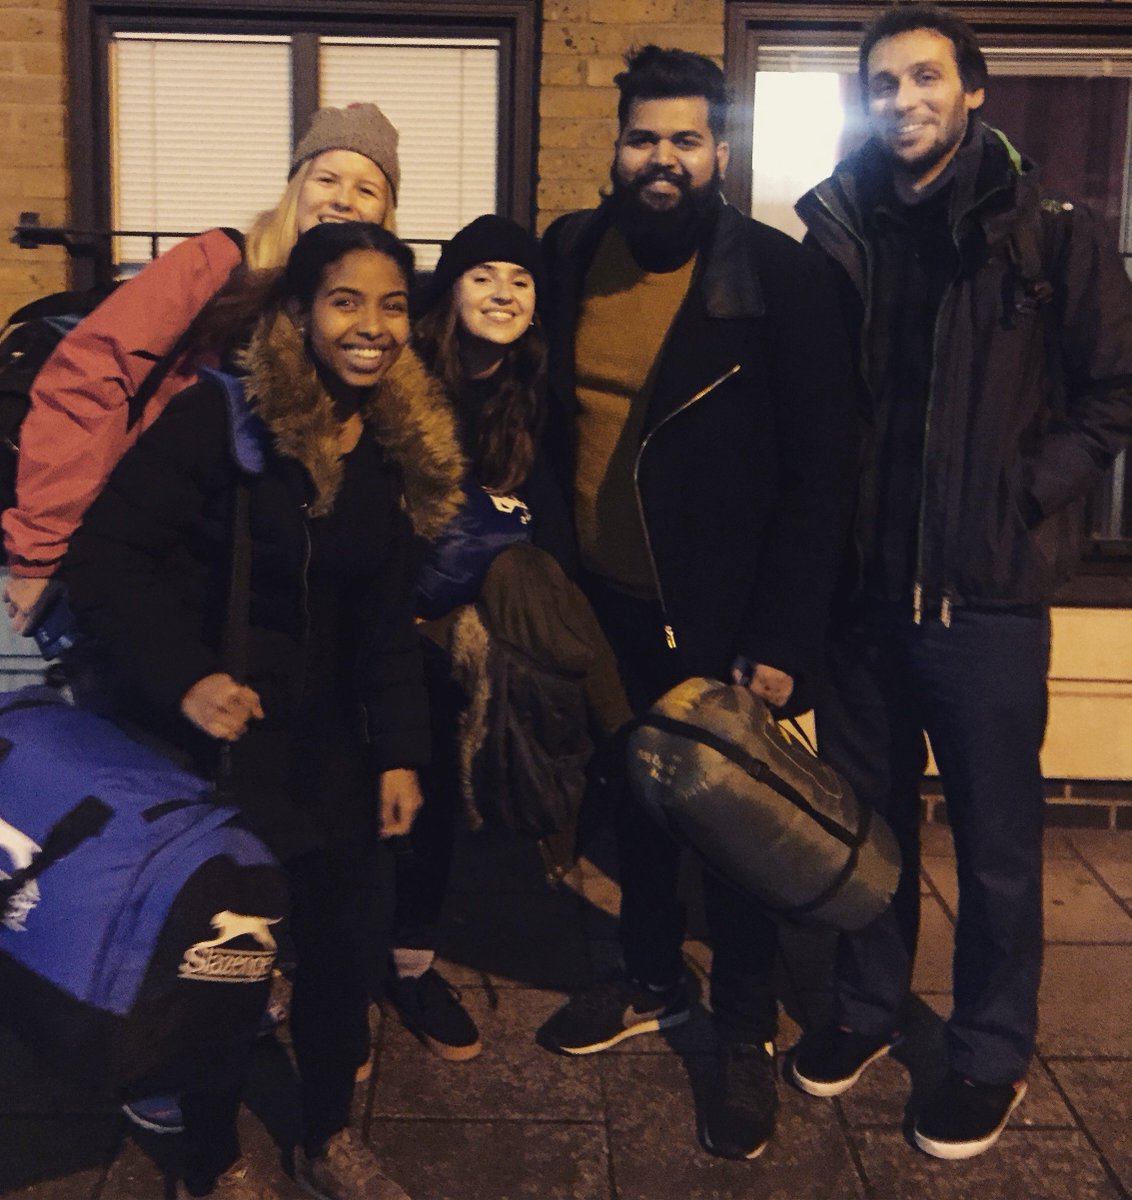 Last night, Nardos, Katrina, Lara, Shahir & Will from our #UKImmigration team Slept Out 4 @centrepointuk  #teamcentrepoint @everydayherouk in support of homeless young people. It was bitterly cold, reaching -1 degrees! Please help them reach their target ow.ly/aWkS30gDF7Y